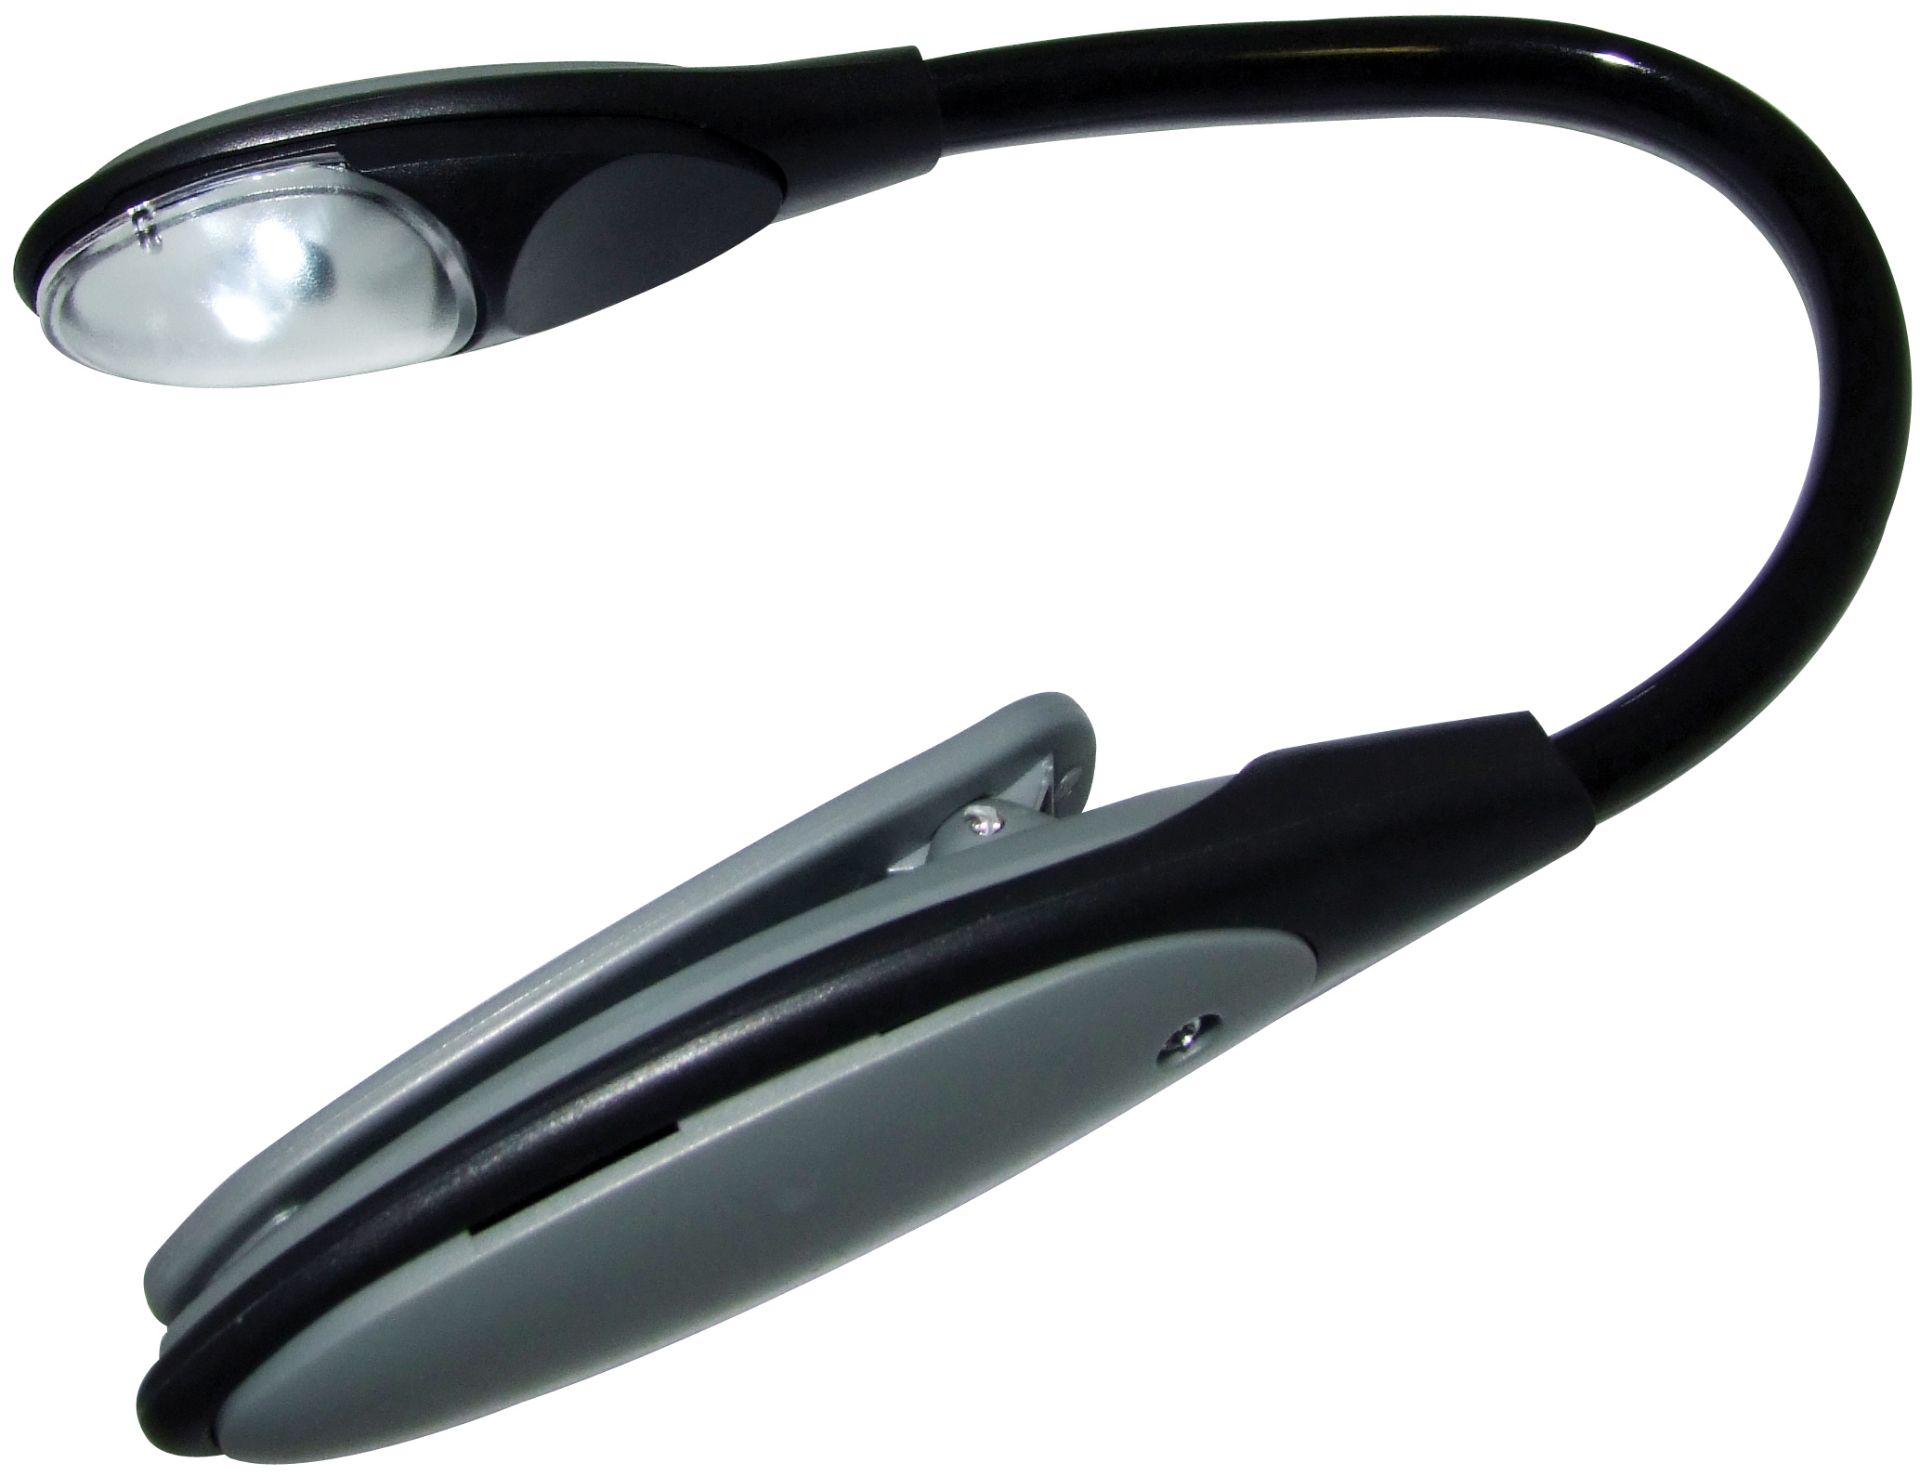 V *TRADE QTY* Brand New Flexible LED Clip Light X 5 YOUR BID PRICE TO BE MULTIPLIED BY FIVE